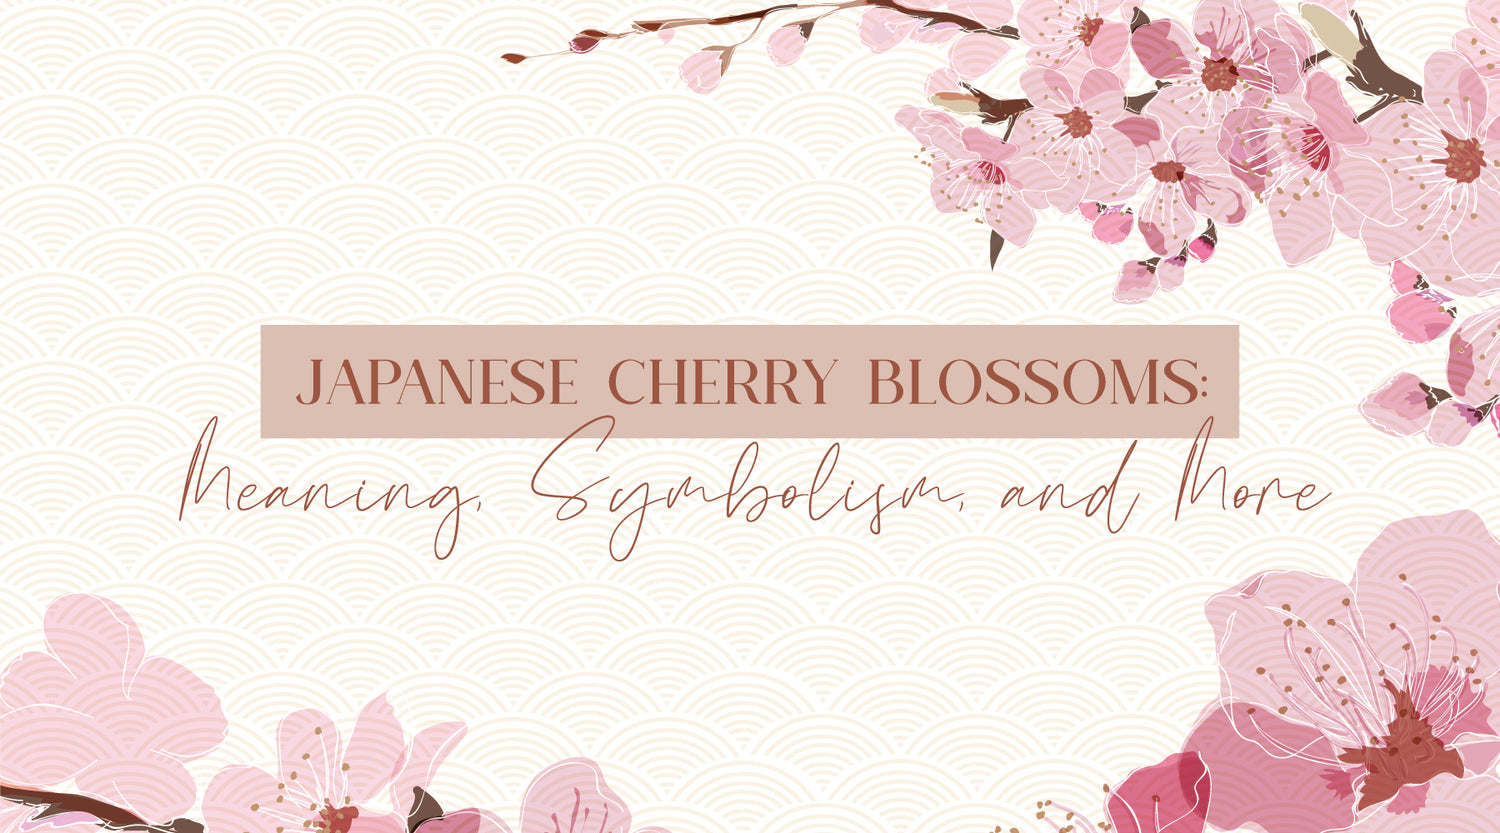 Japanese Cherry Blossoms: Meaning, Symbolism, and More